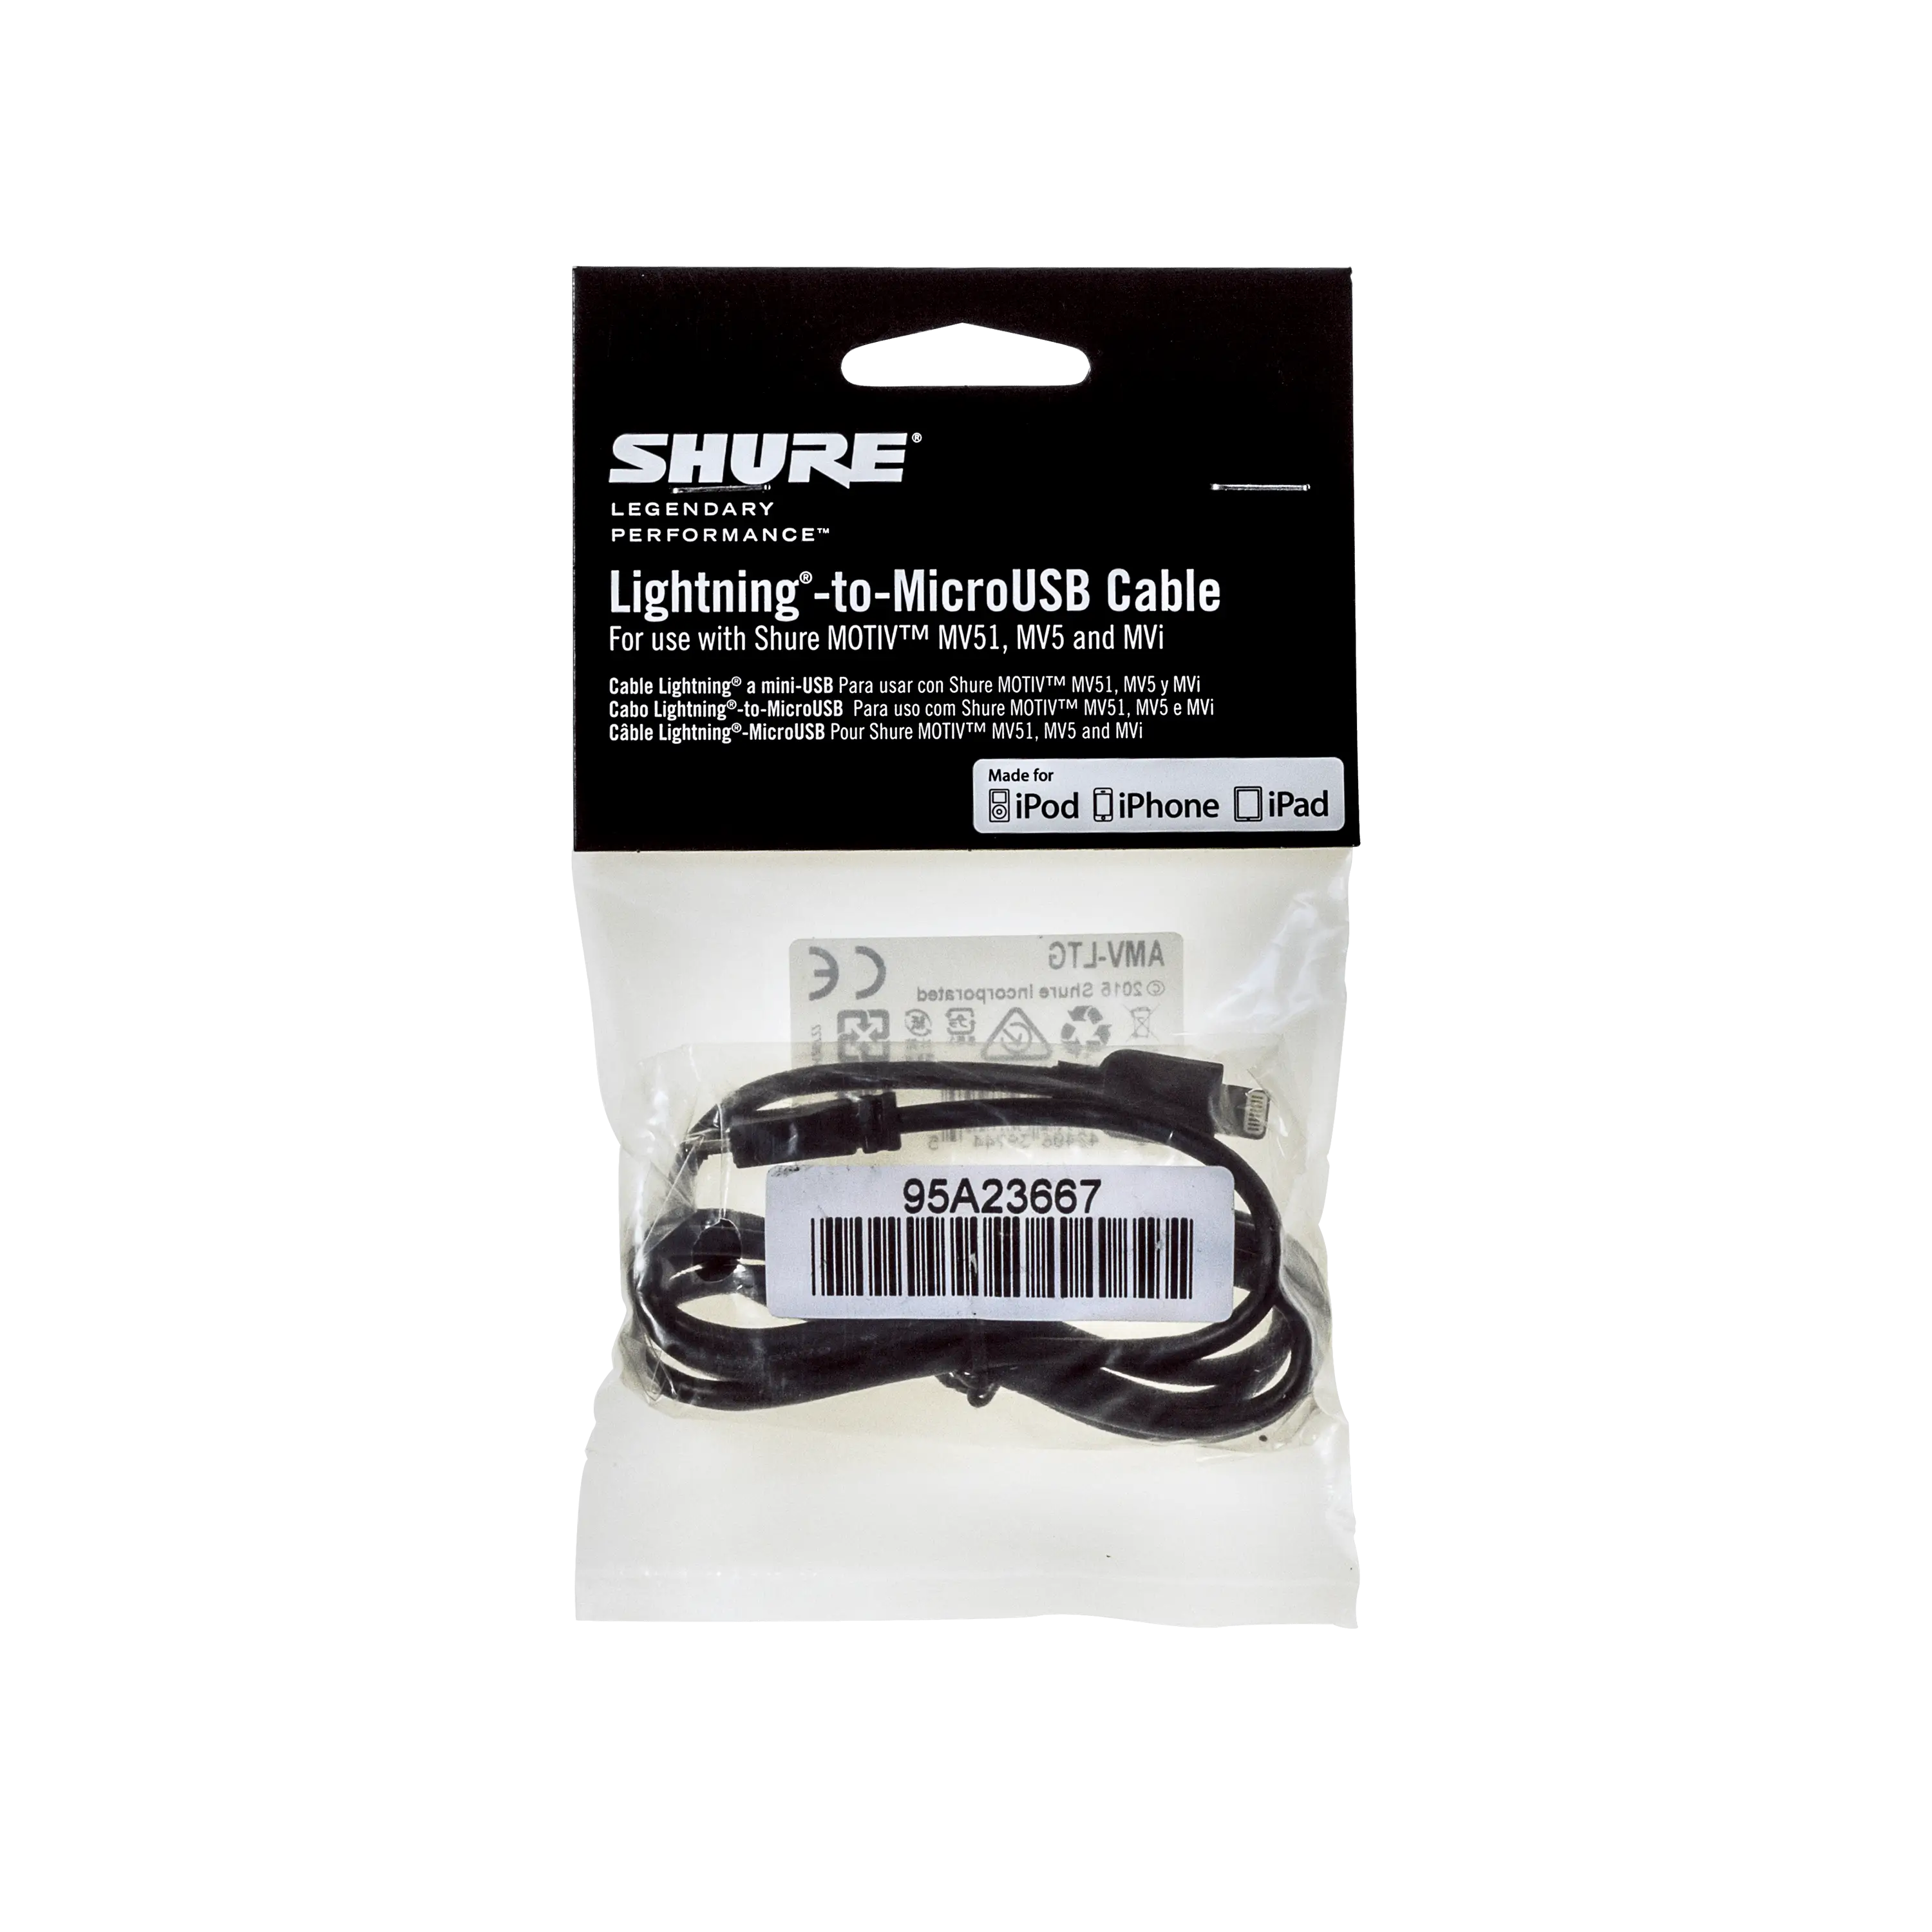 AMV-LTG - Accessory 1m Lightning-to-MicroUSB Cable - Shure United 